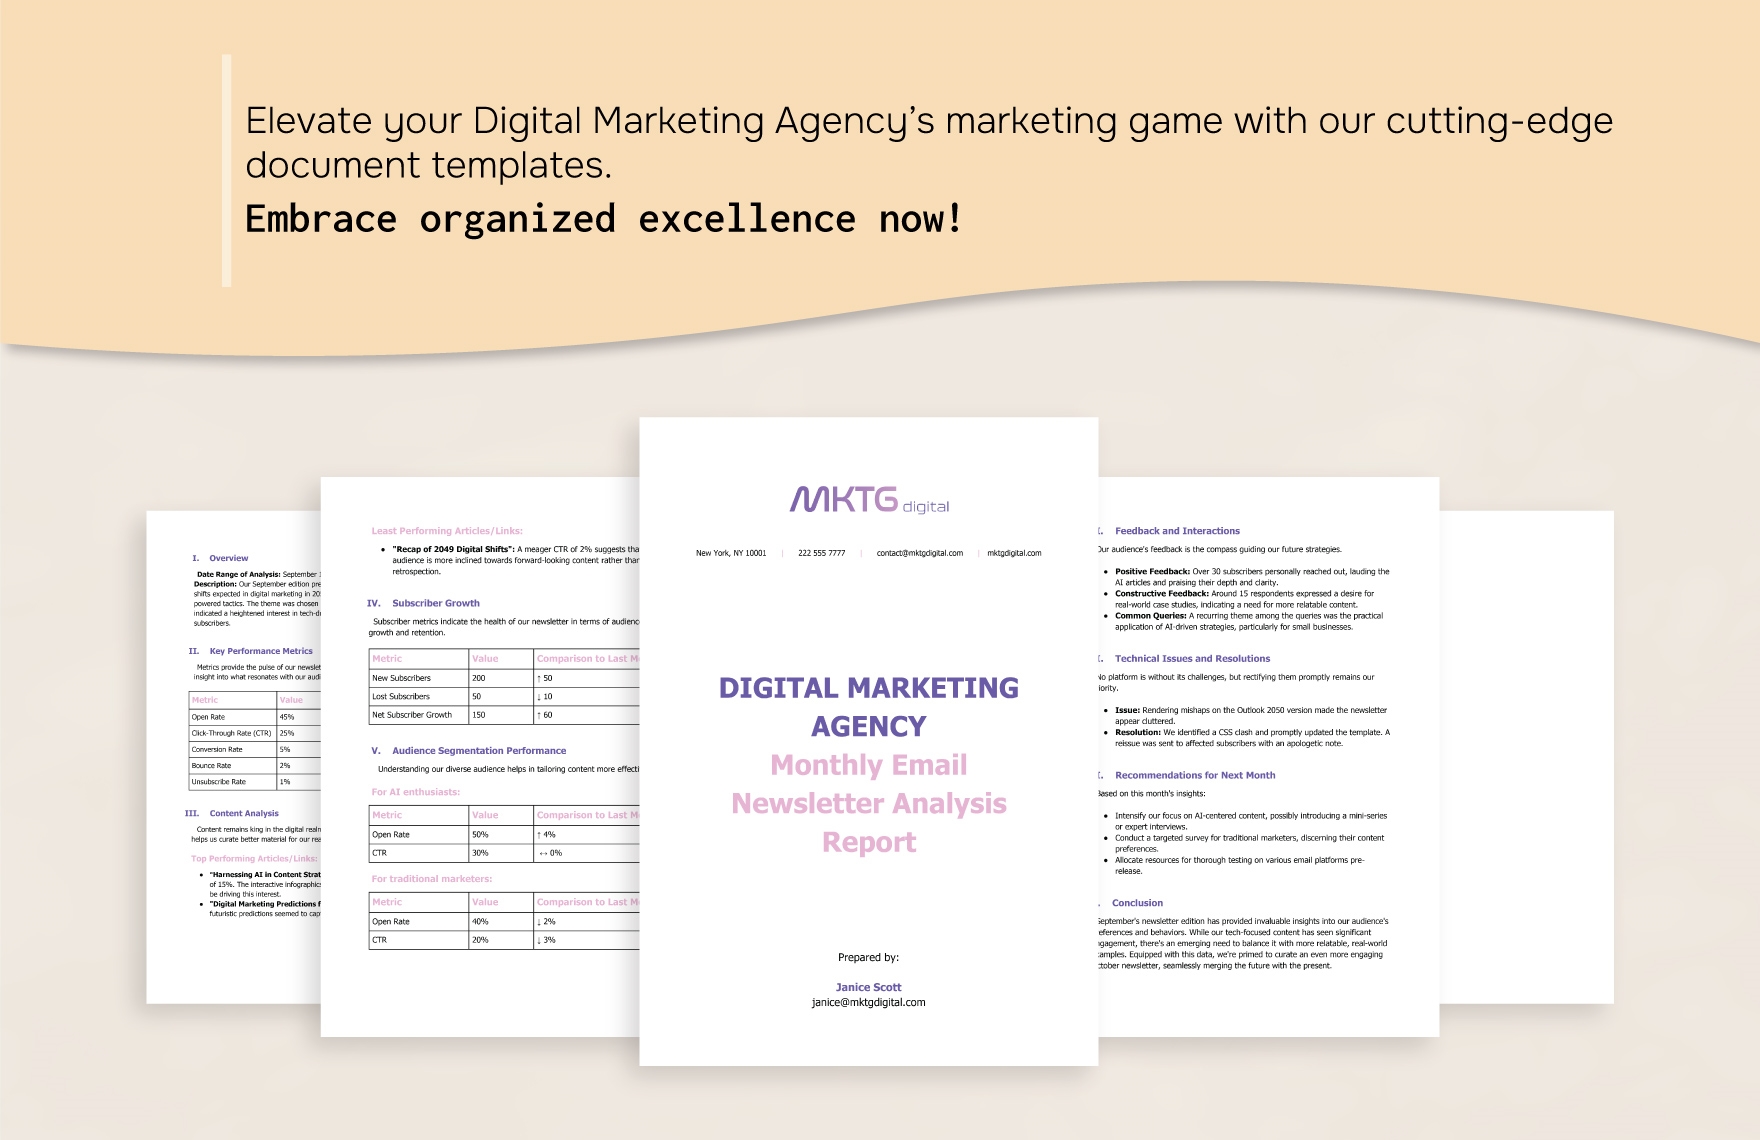 Digital Marketing Agency Monthly Email Newsletter Analysis Report Template